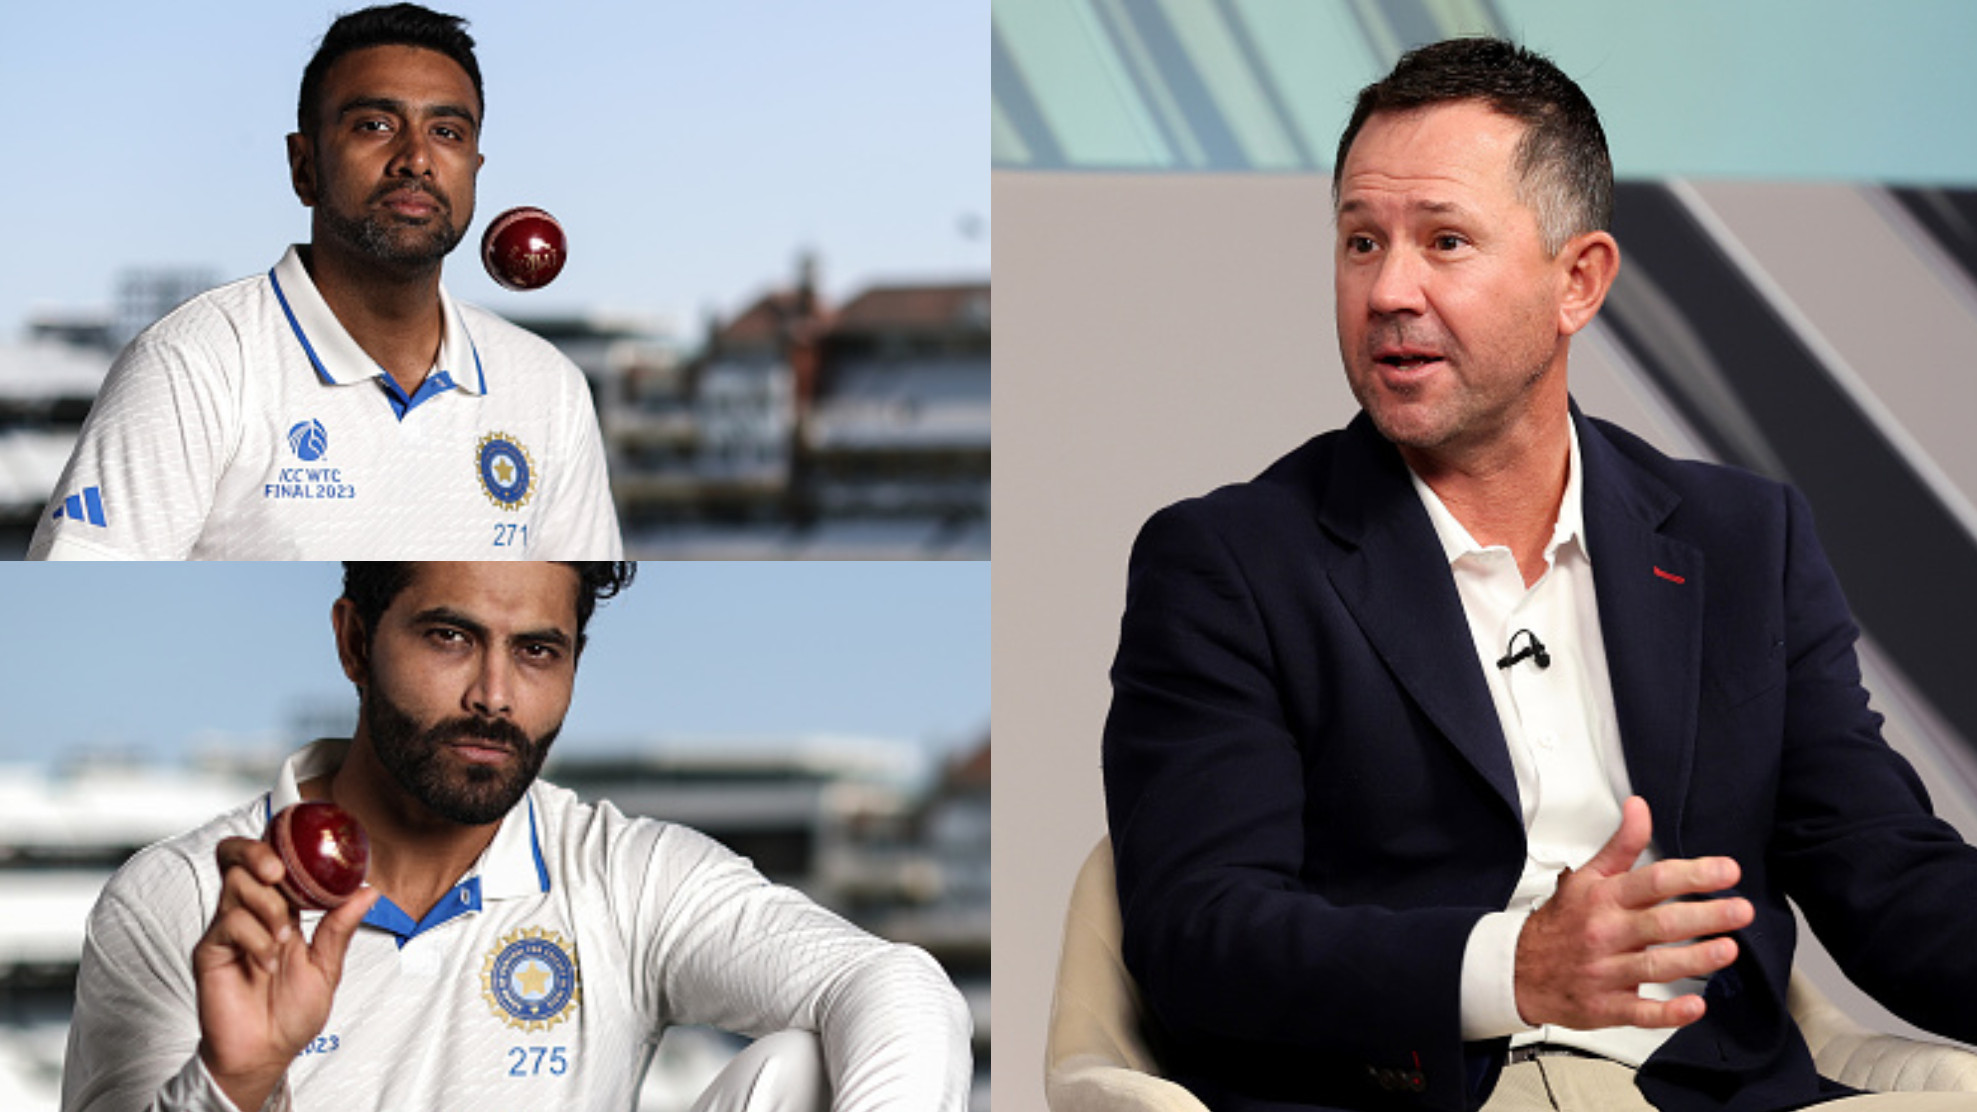 WTC 2023 Final: Ricky Ponting picks his favorite; says India should go with both Ashwin and Jadeja